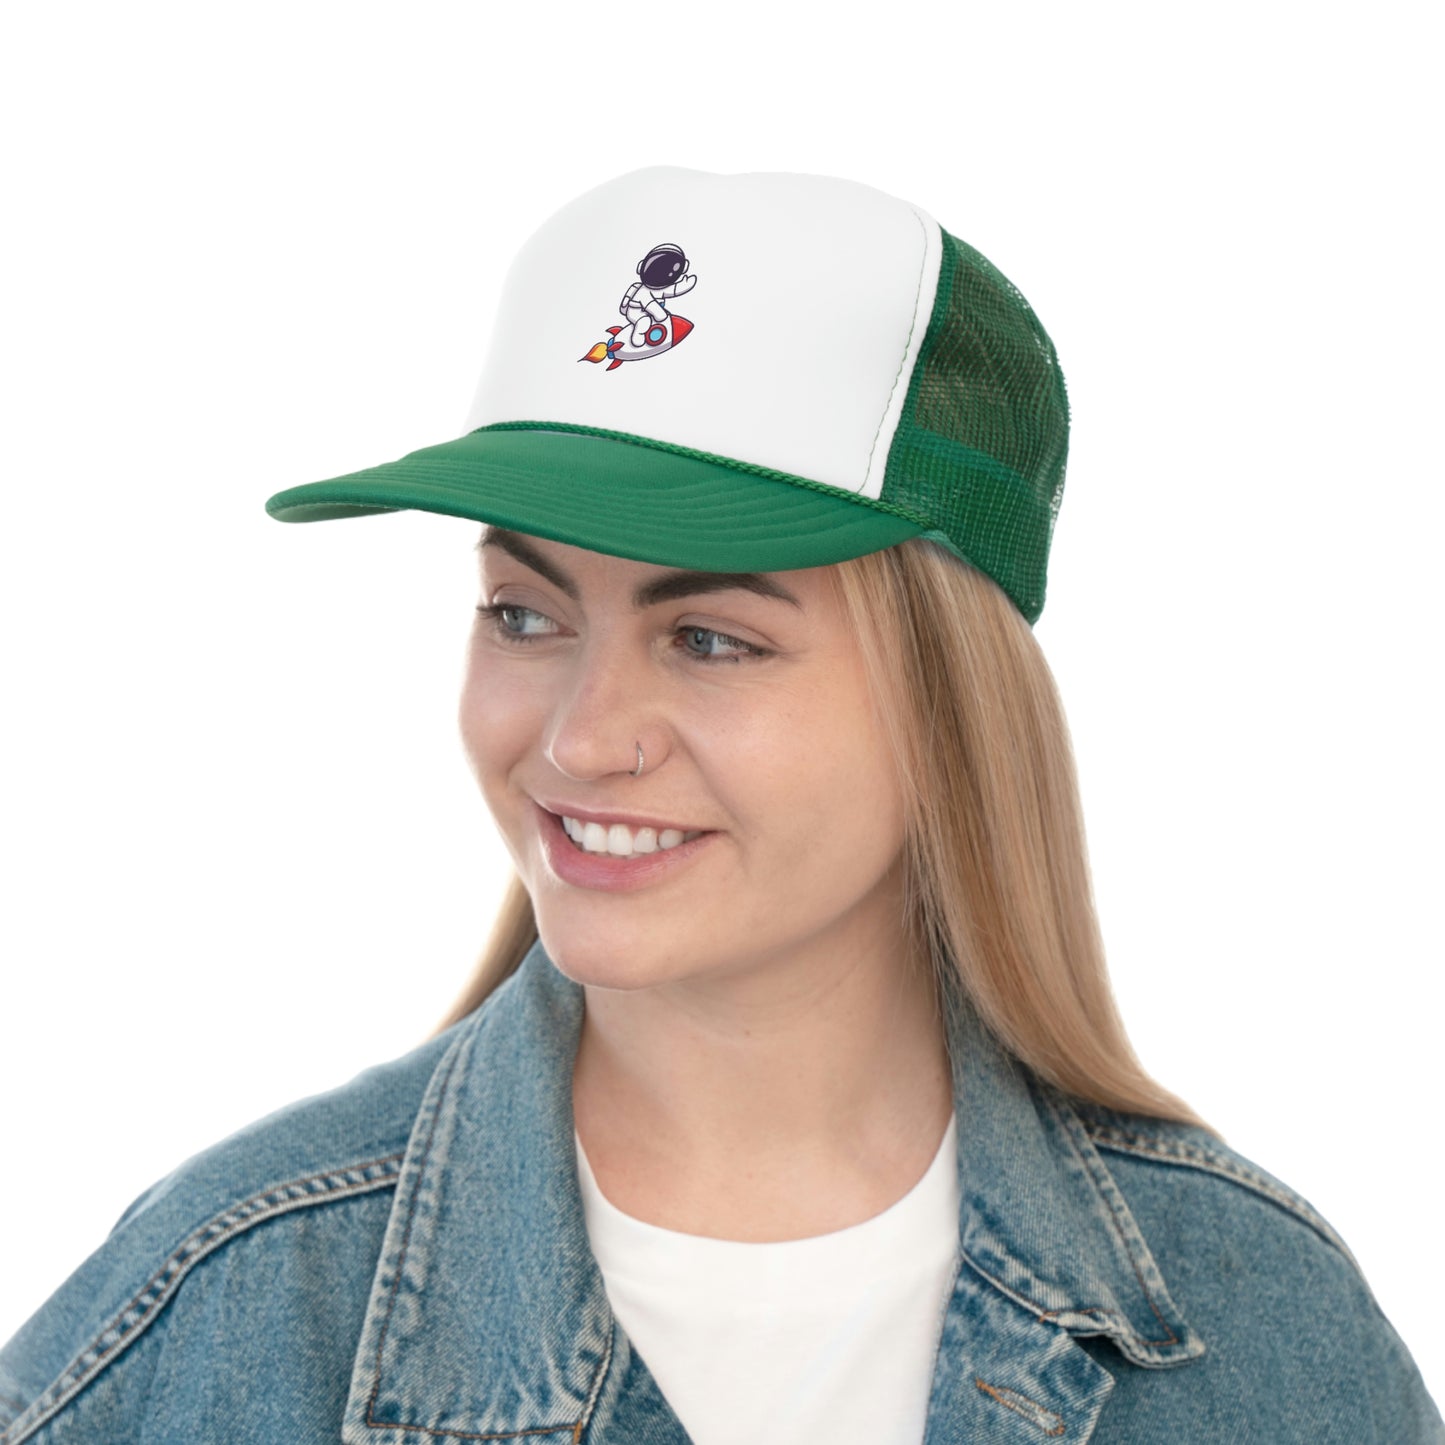 Hat Embark on a Cosmic Journey with Our Trucker Hat Featuring an Astronaut Riding a Spaceship